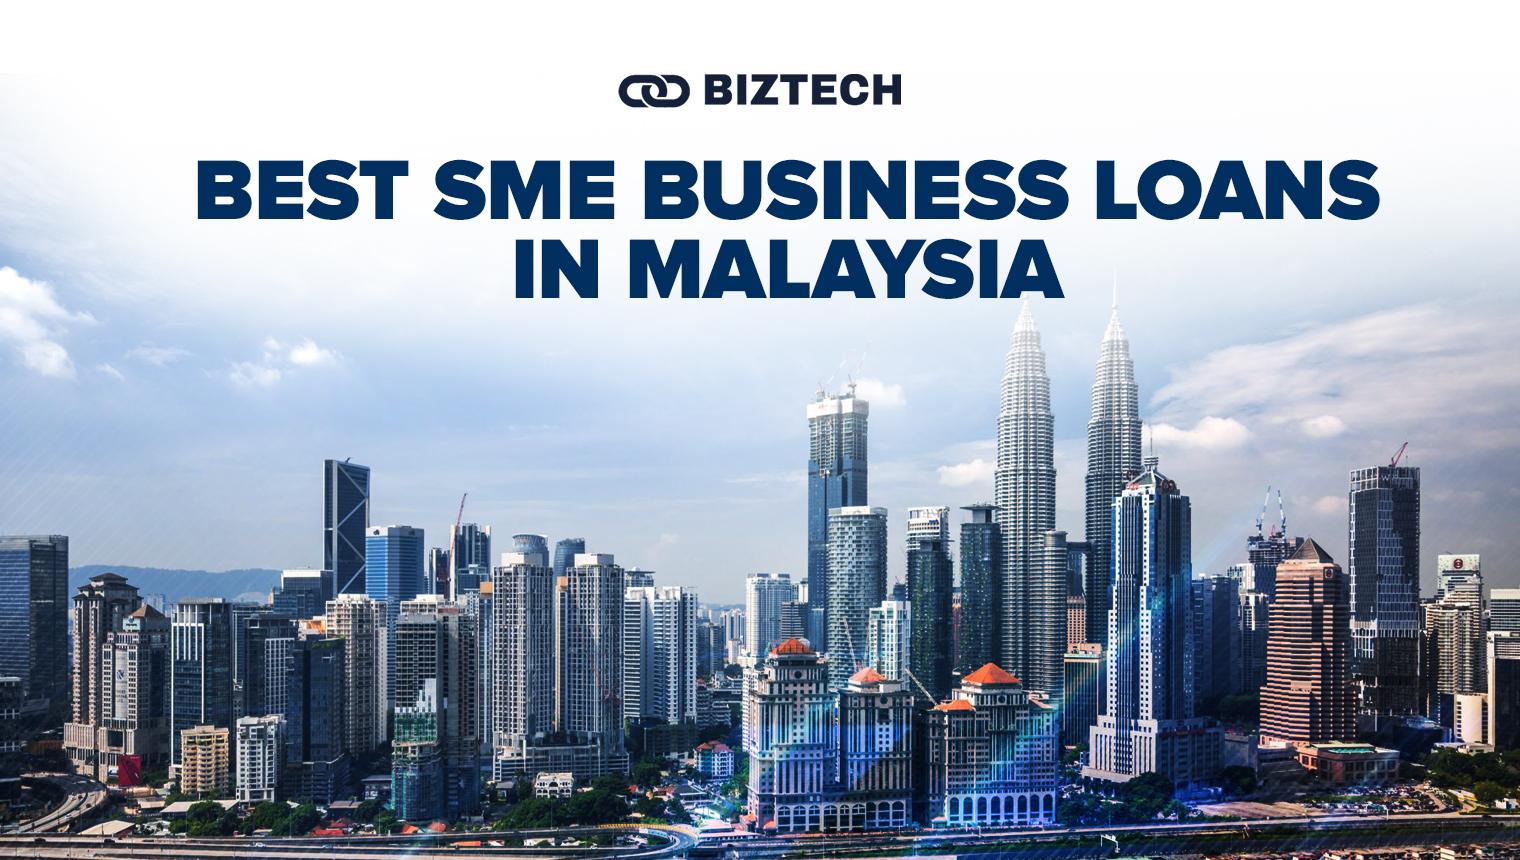 Best SME Business Loans in Malaysia